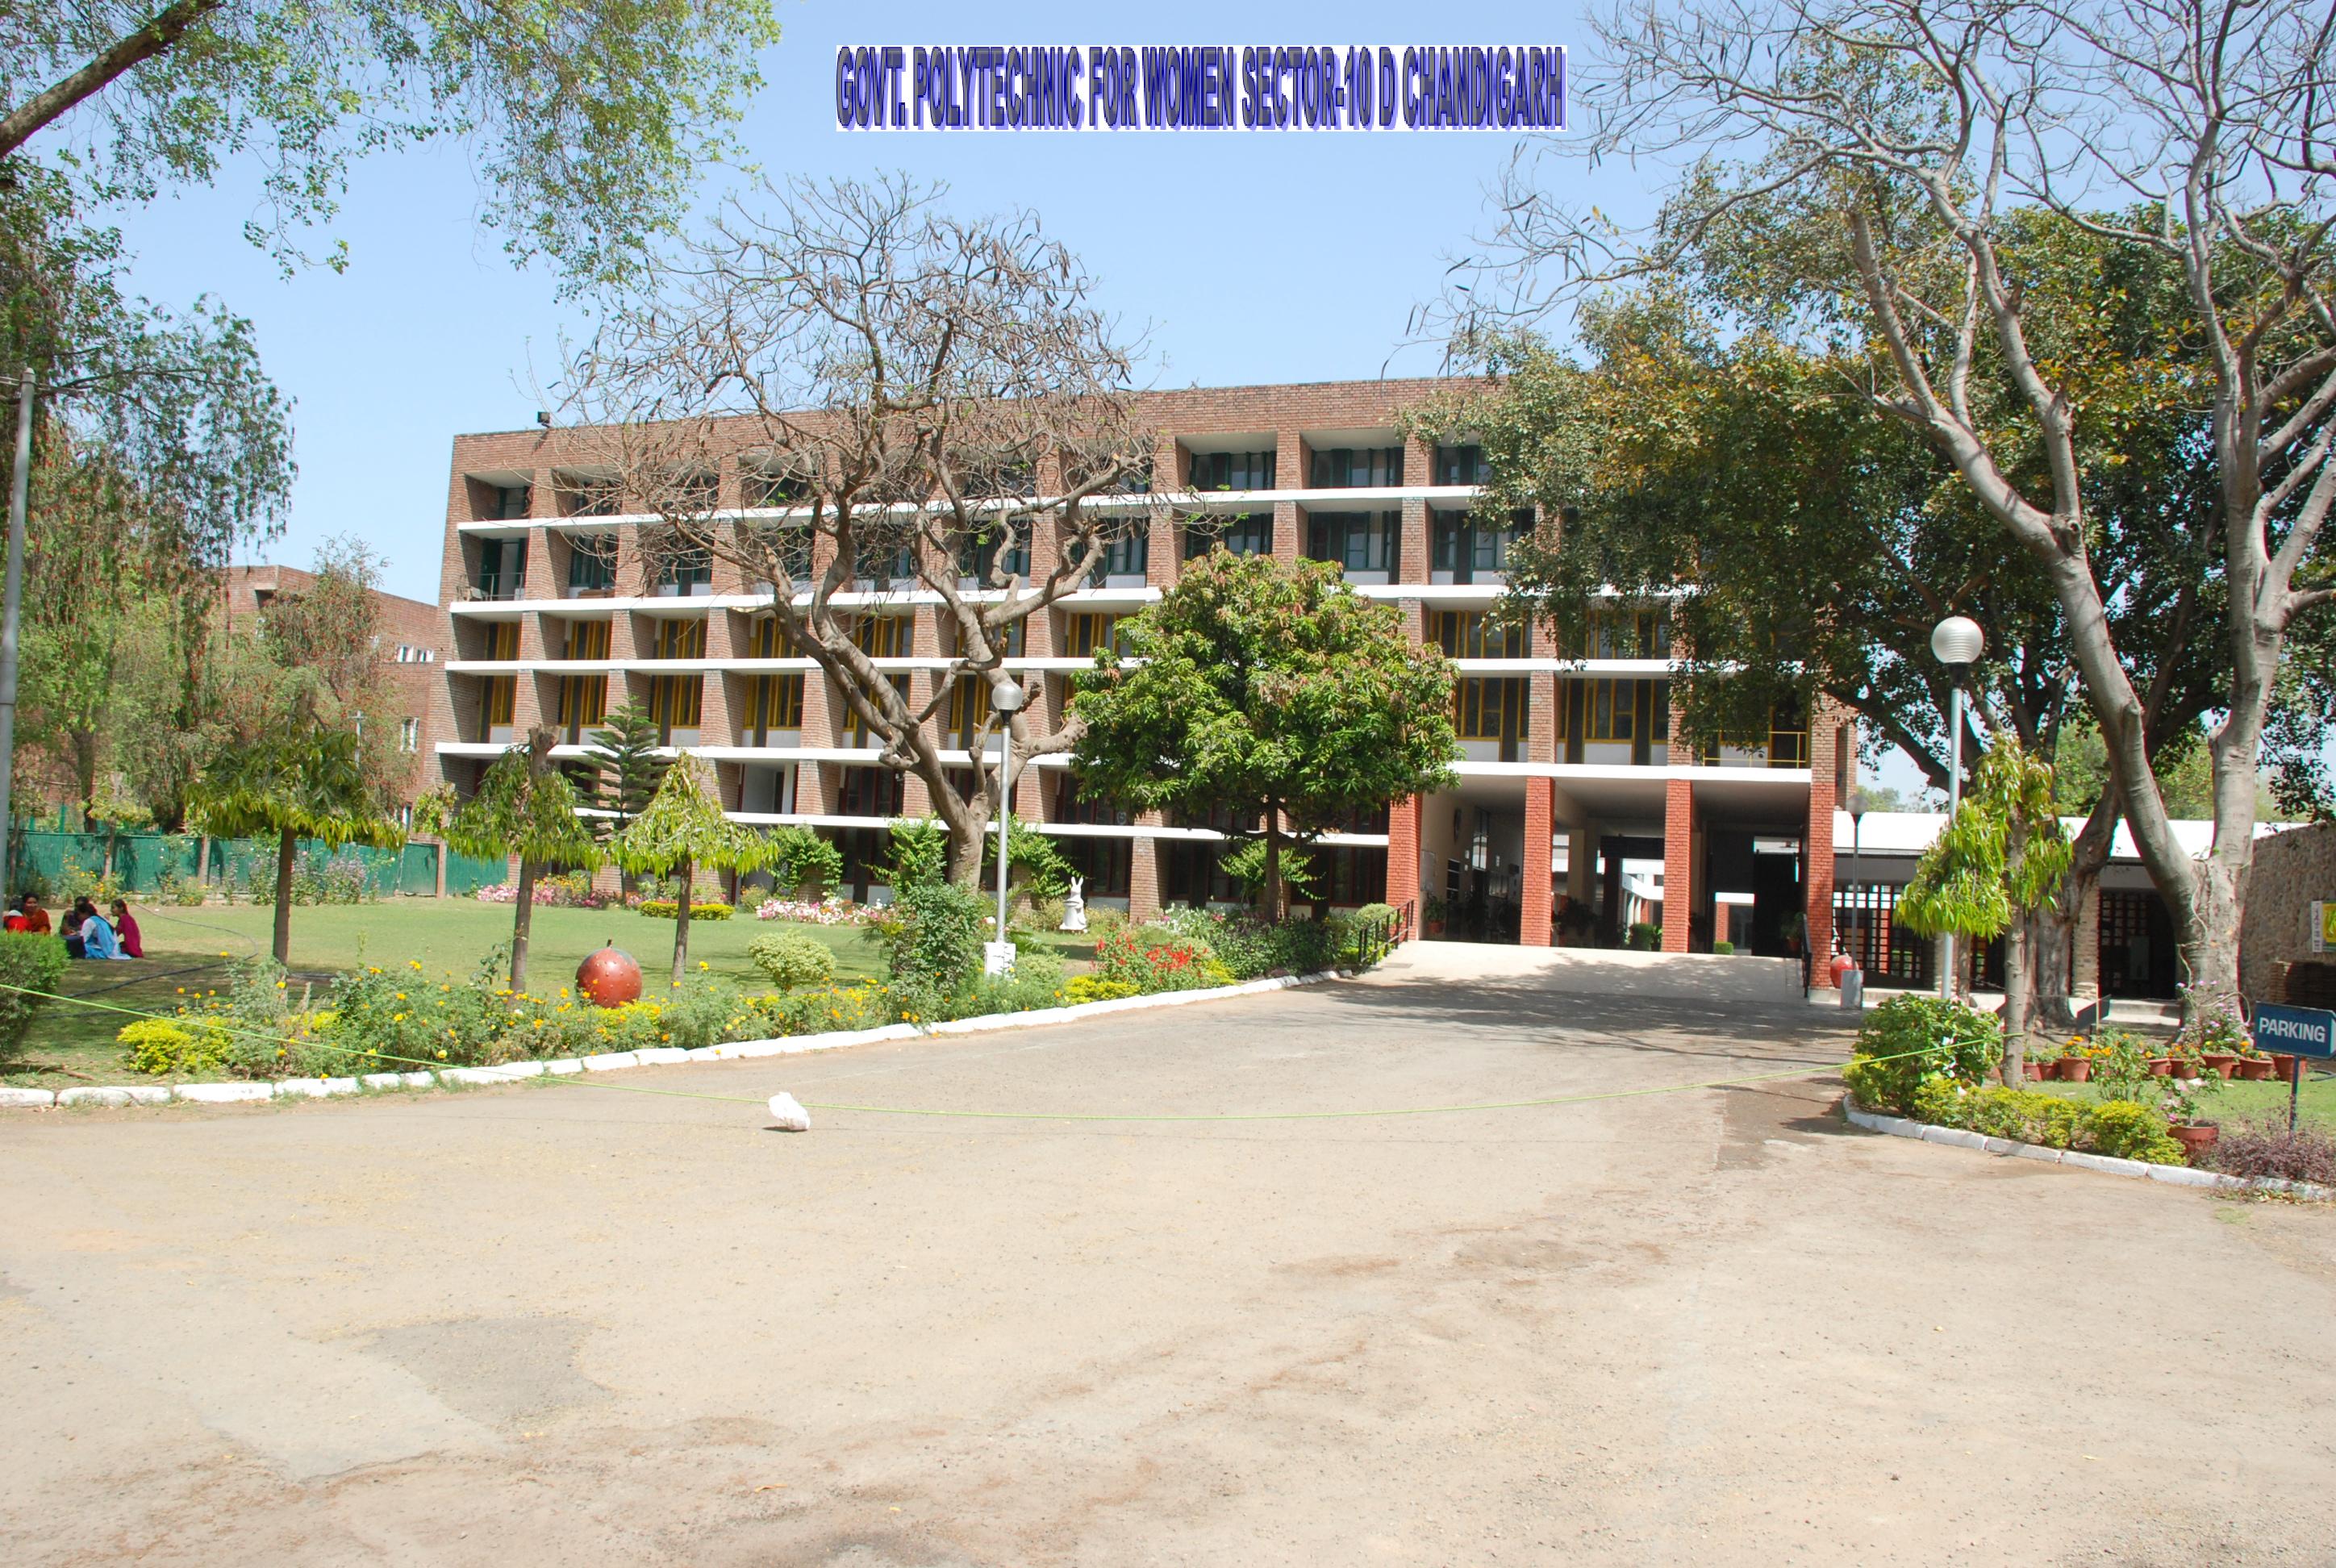 Government Polytechnic for Women